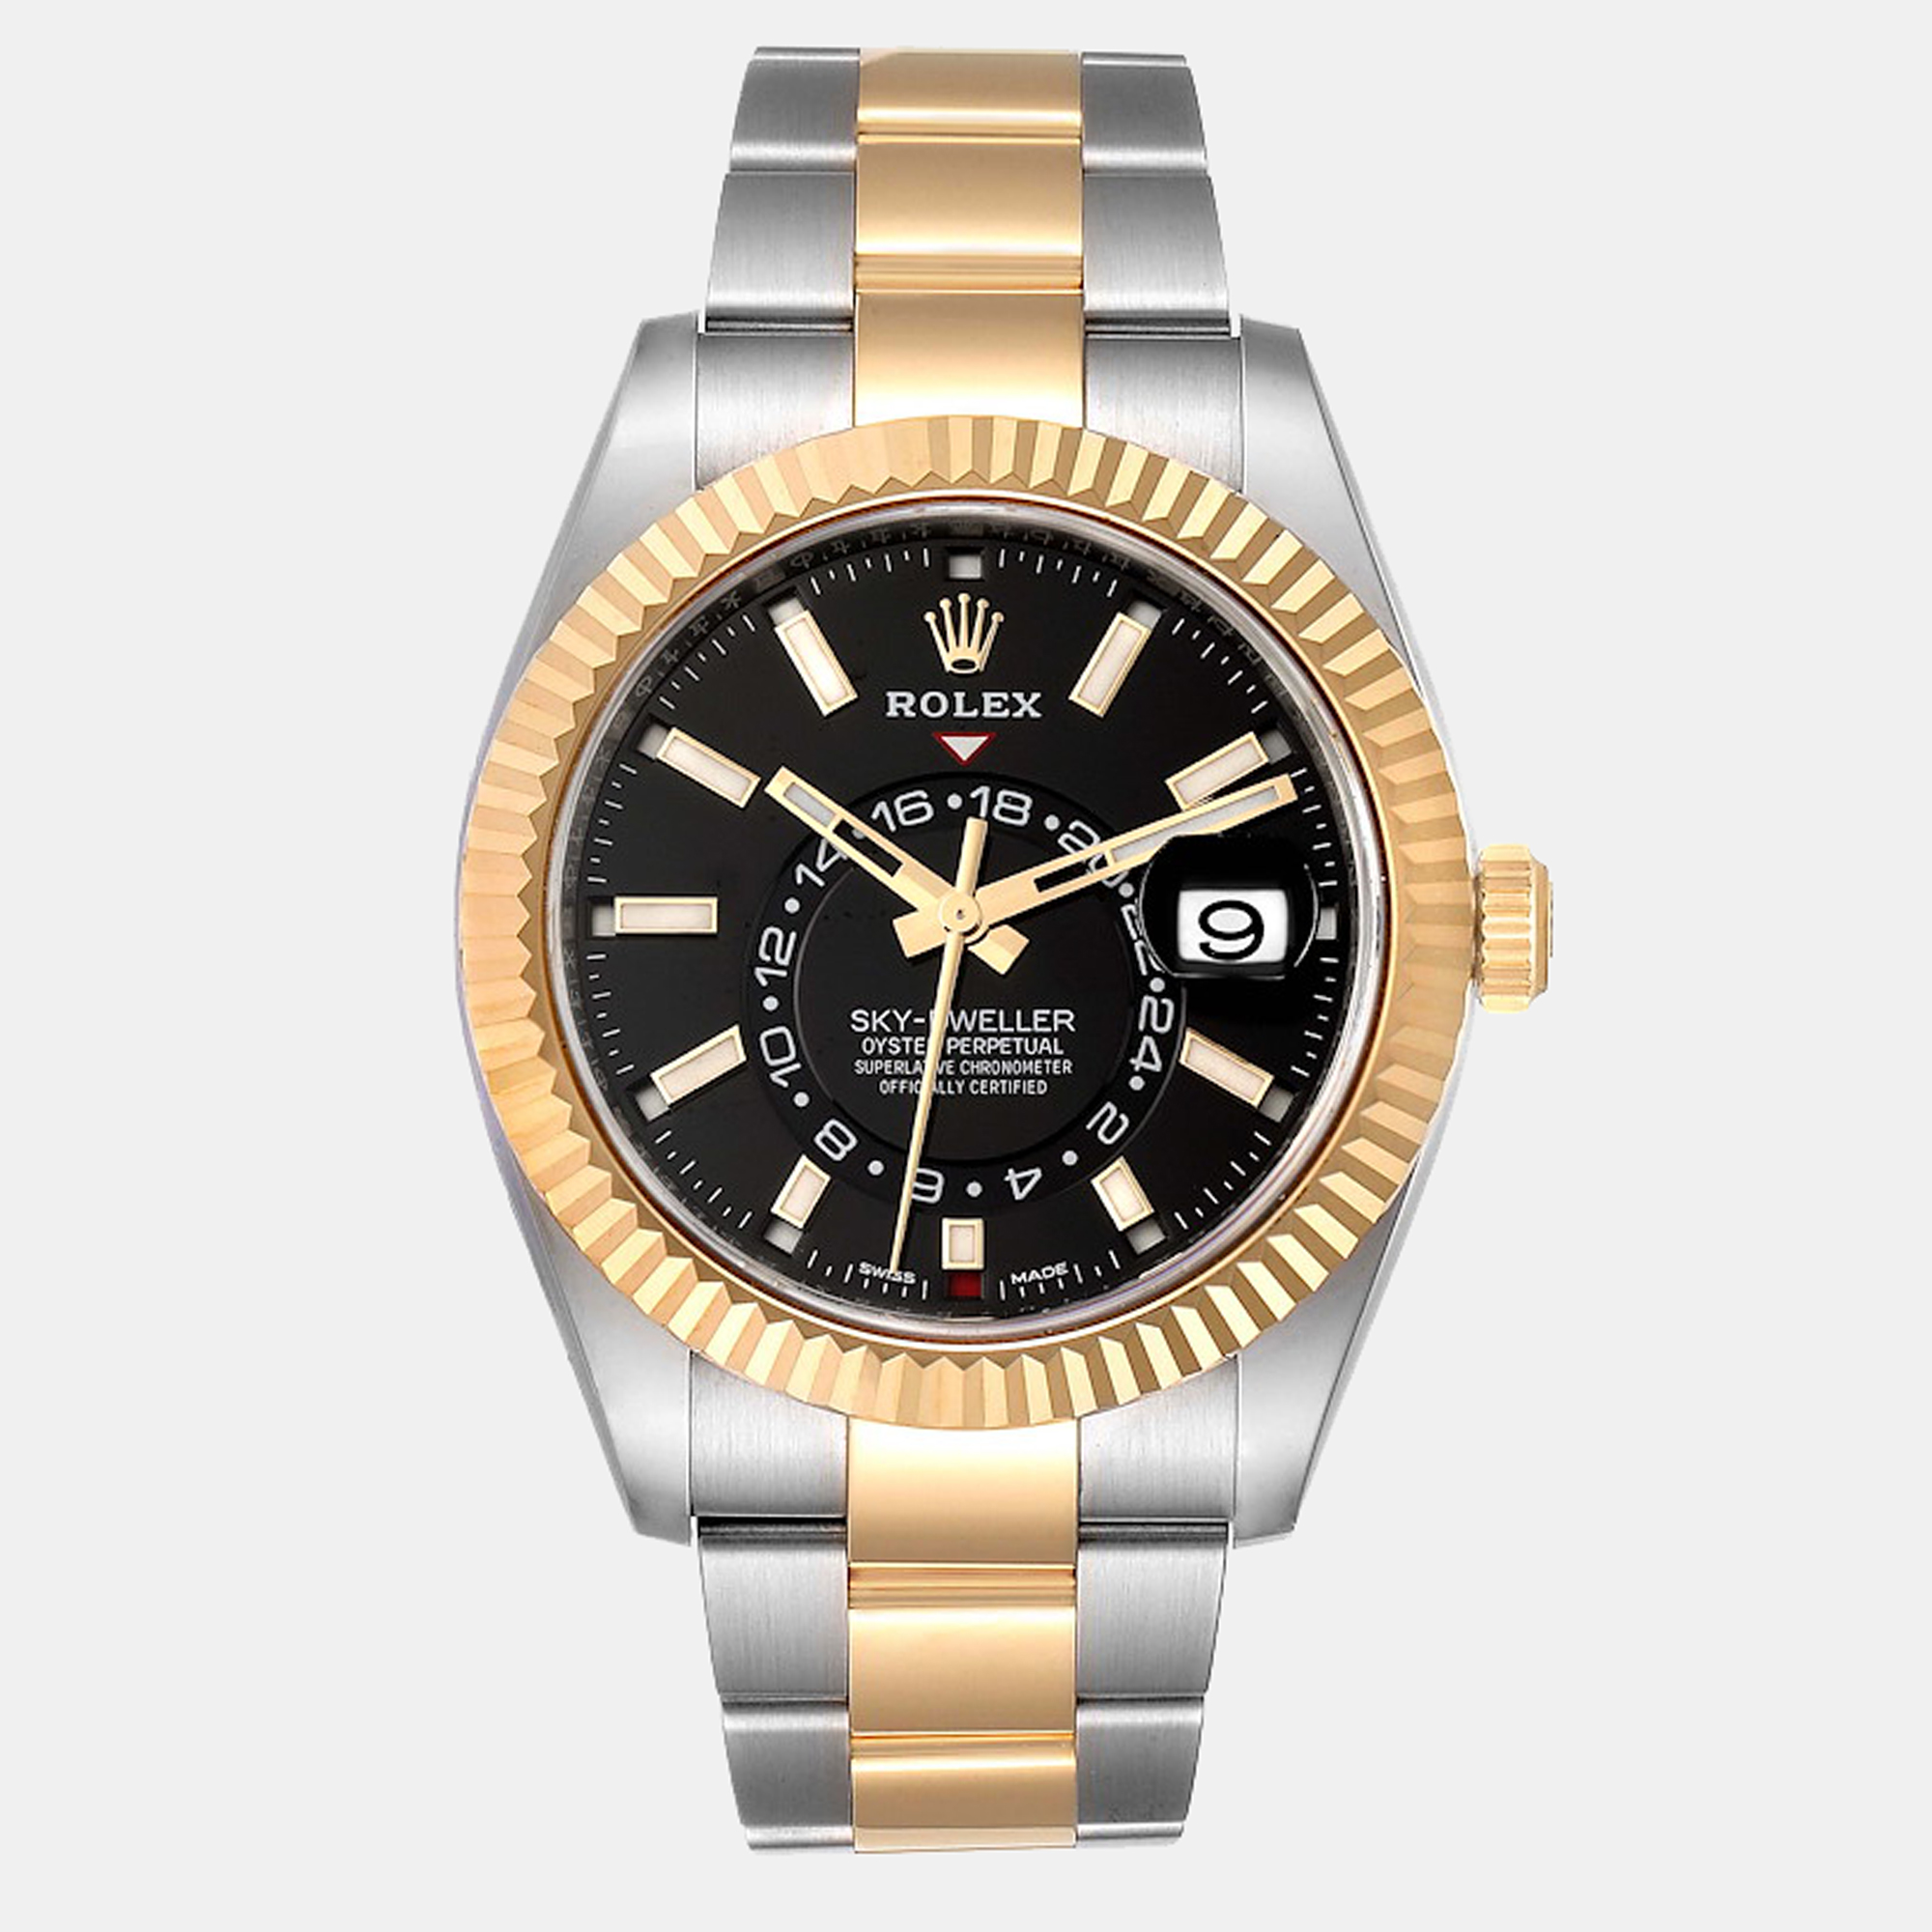 For those looking to invest in a designer watch that promises to deliver style points and remain timeless Rolex offers this stunning Sky Dweller watch in 42 mm. Its a beauty from every angle.